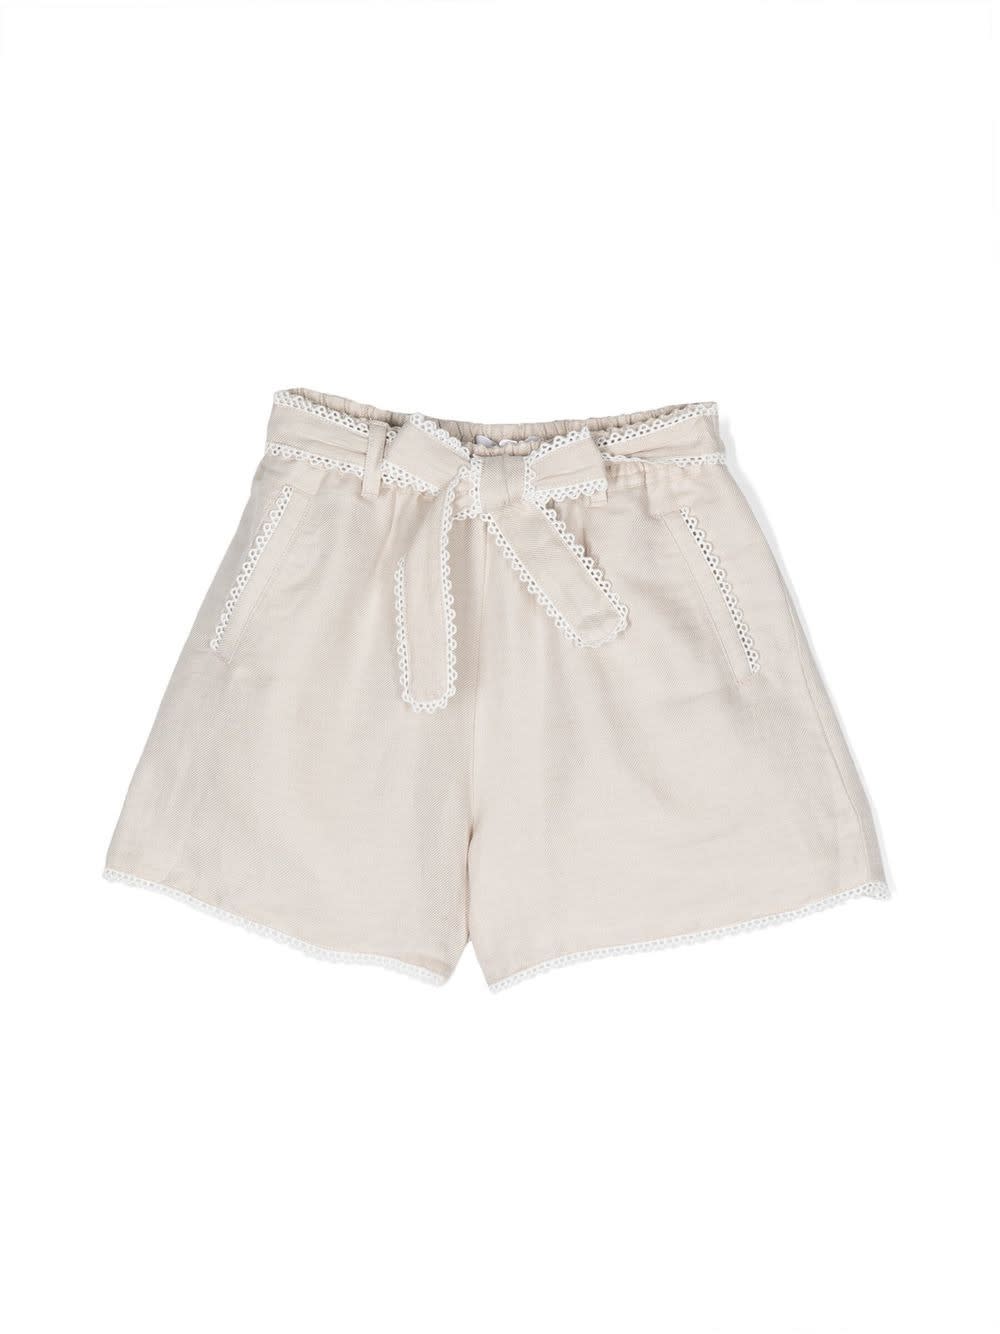 CHLOÉ IVORY LINEN AND COTTON SHORTS WITH GUIPURE